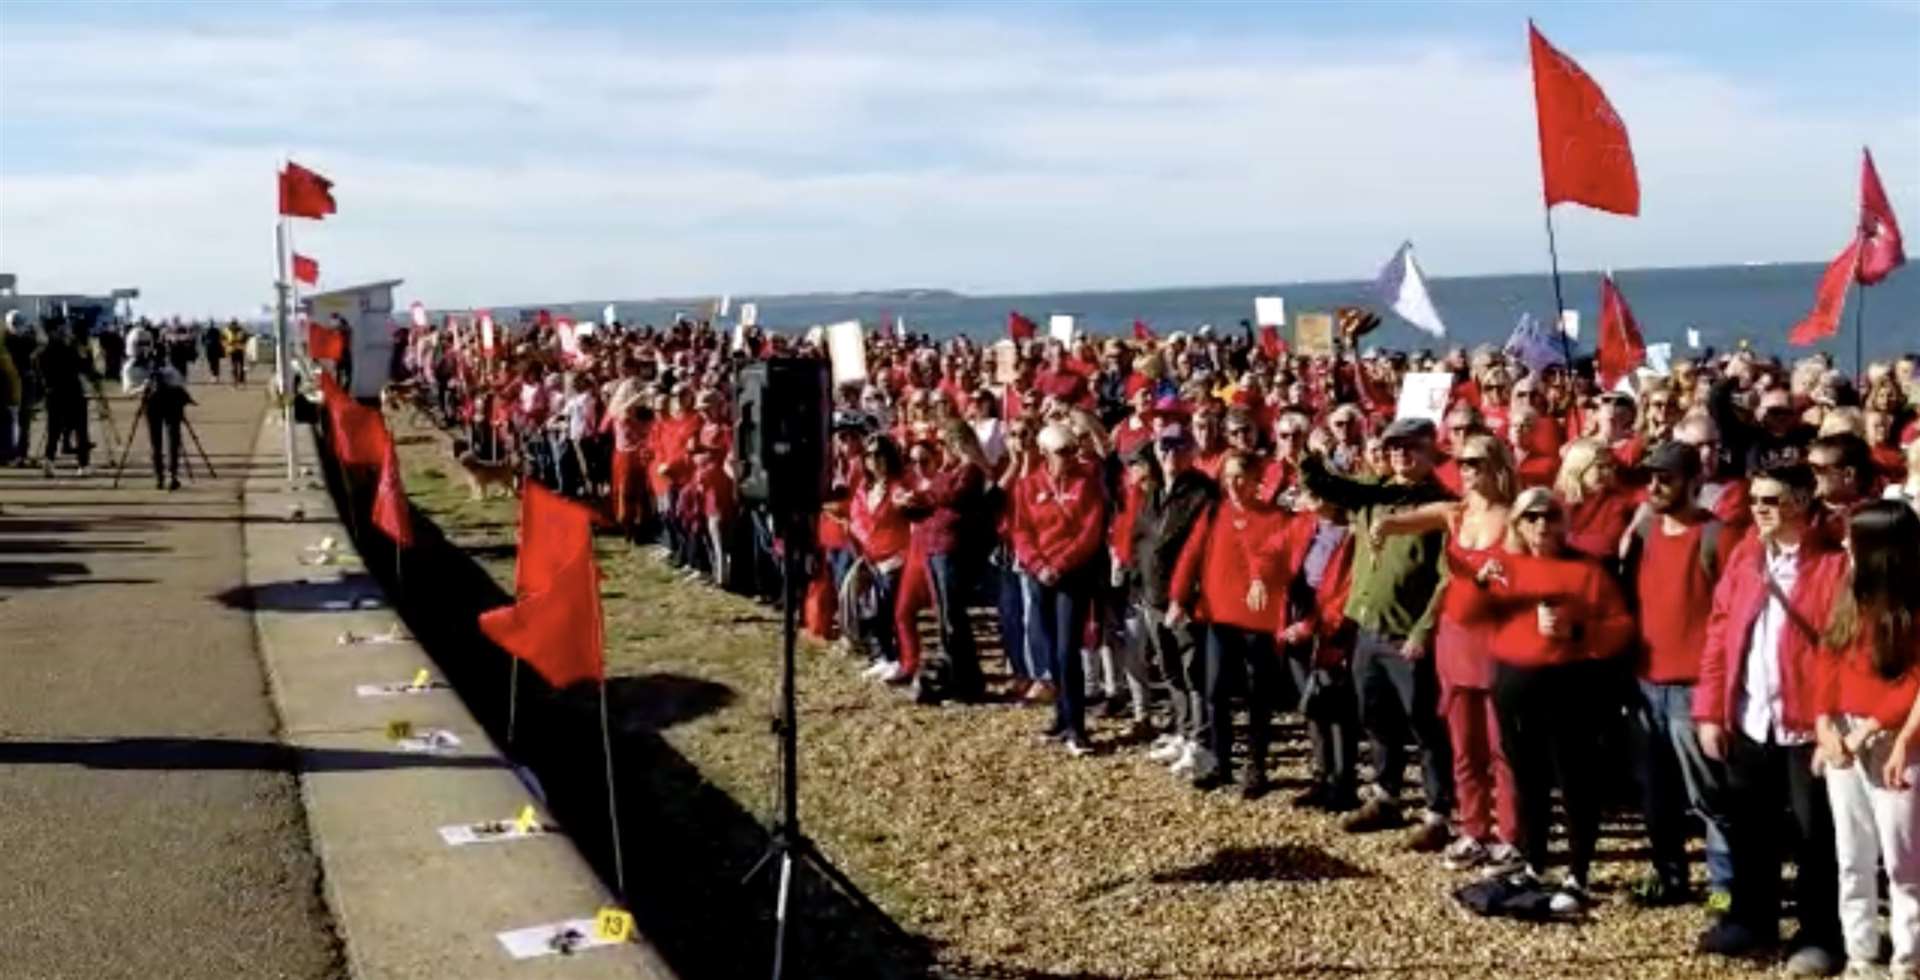 An estimated 2,000 people were in attendance at the SOS Whitstable protest. Photo: SOS Whitstable